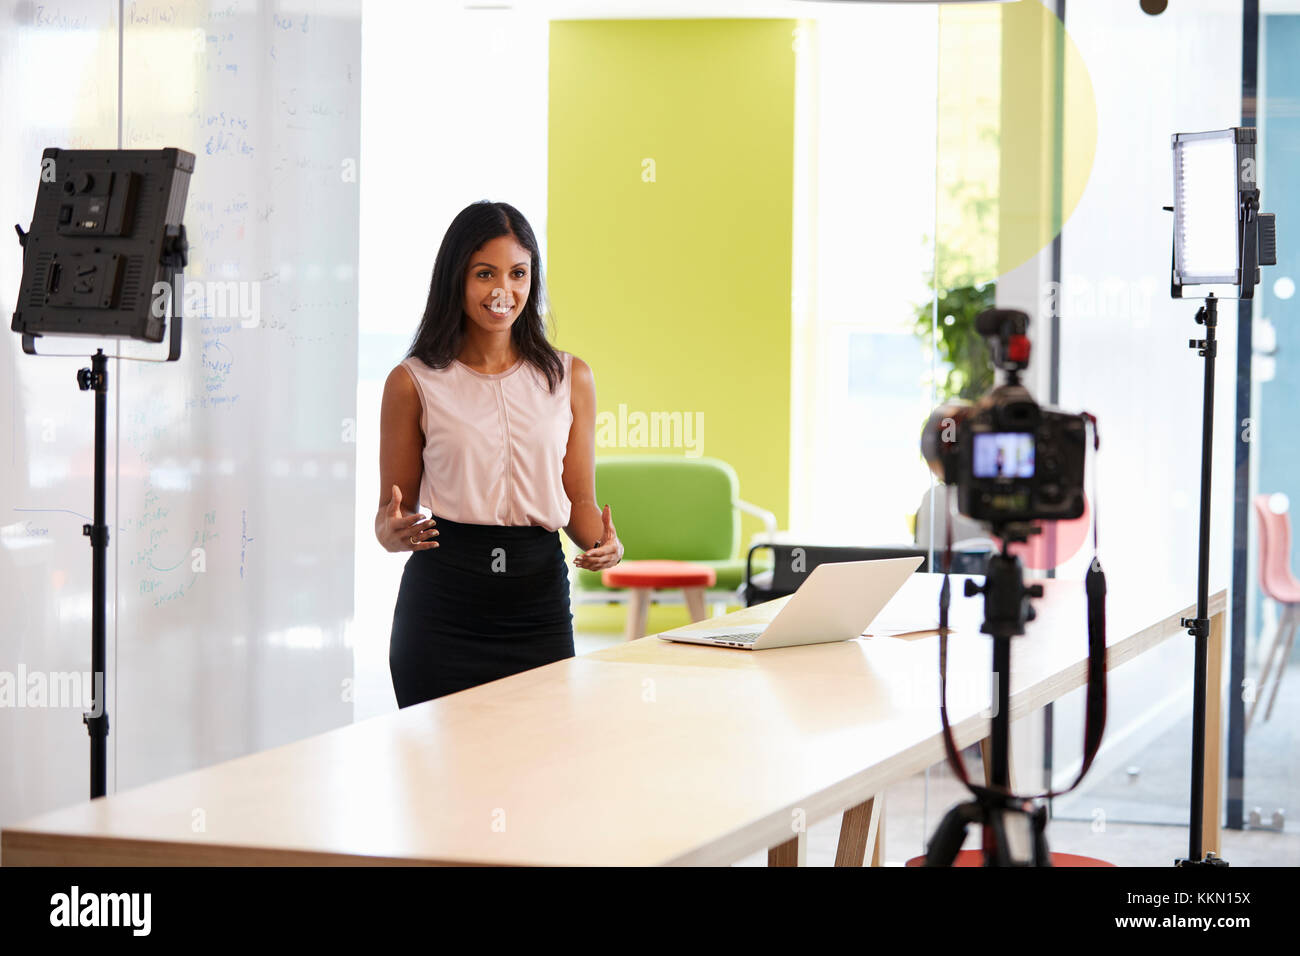 Young woman making a corporate demonstration video Stock Photo